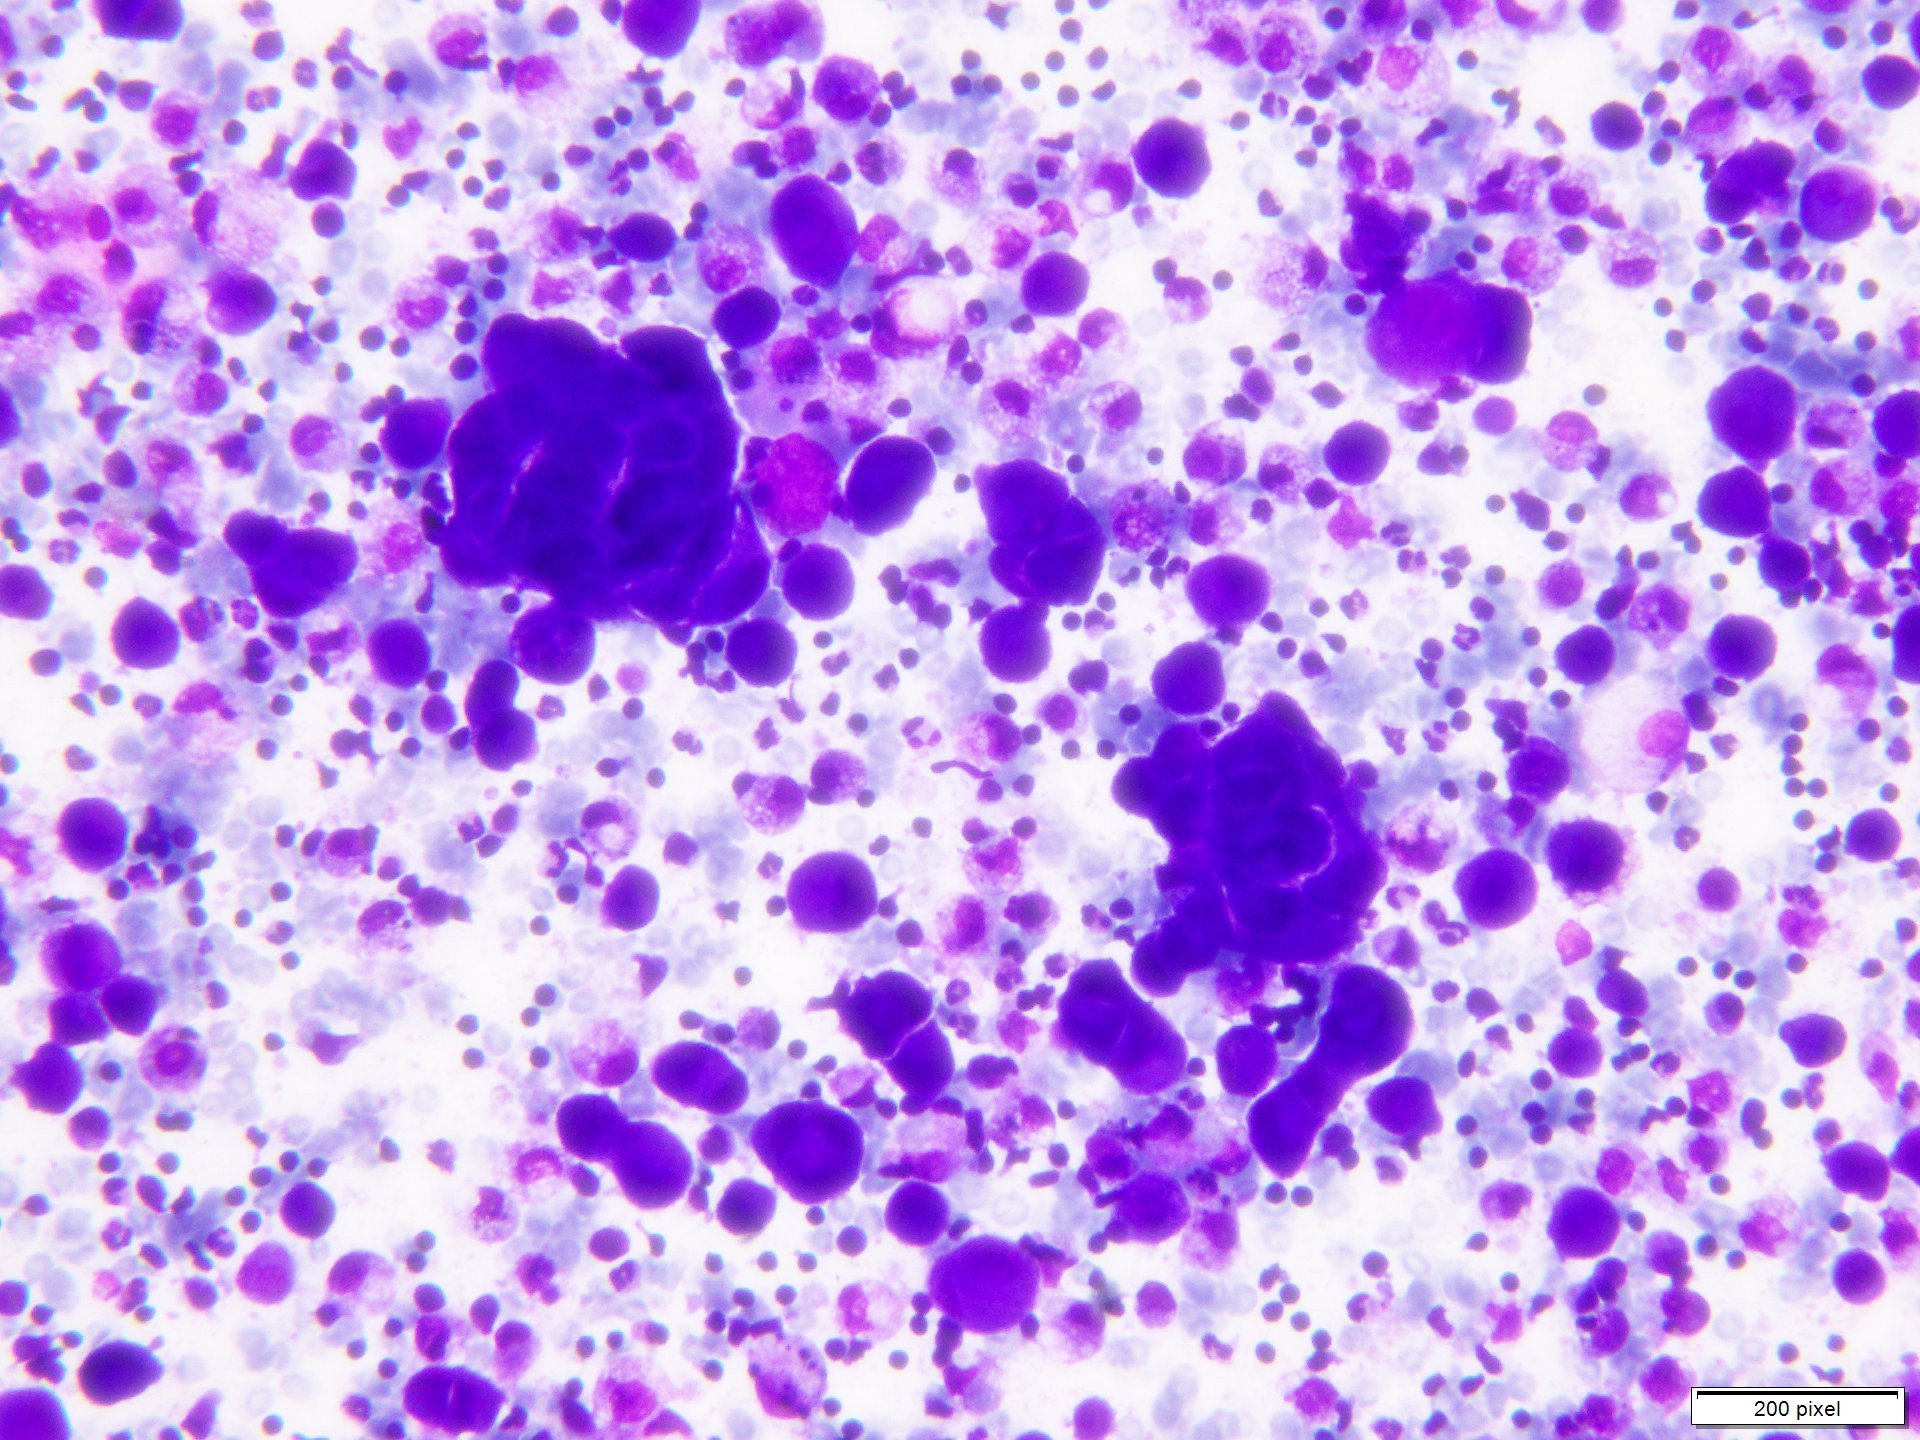 Diff-Quik stained smear